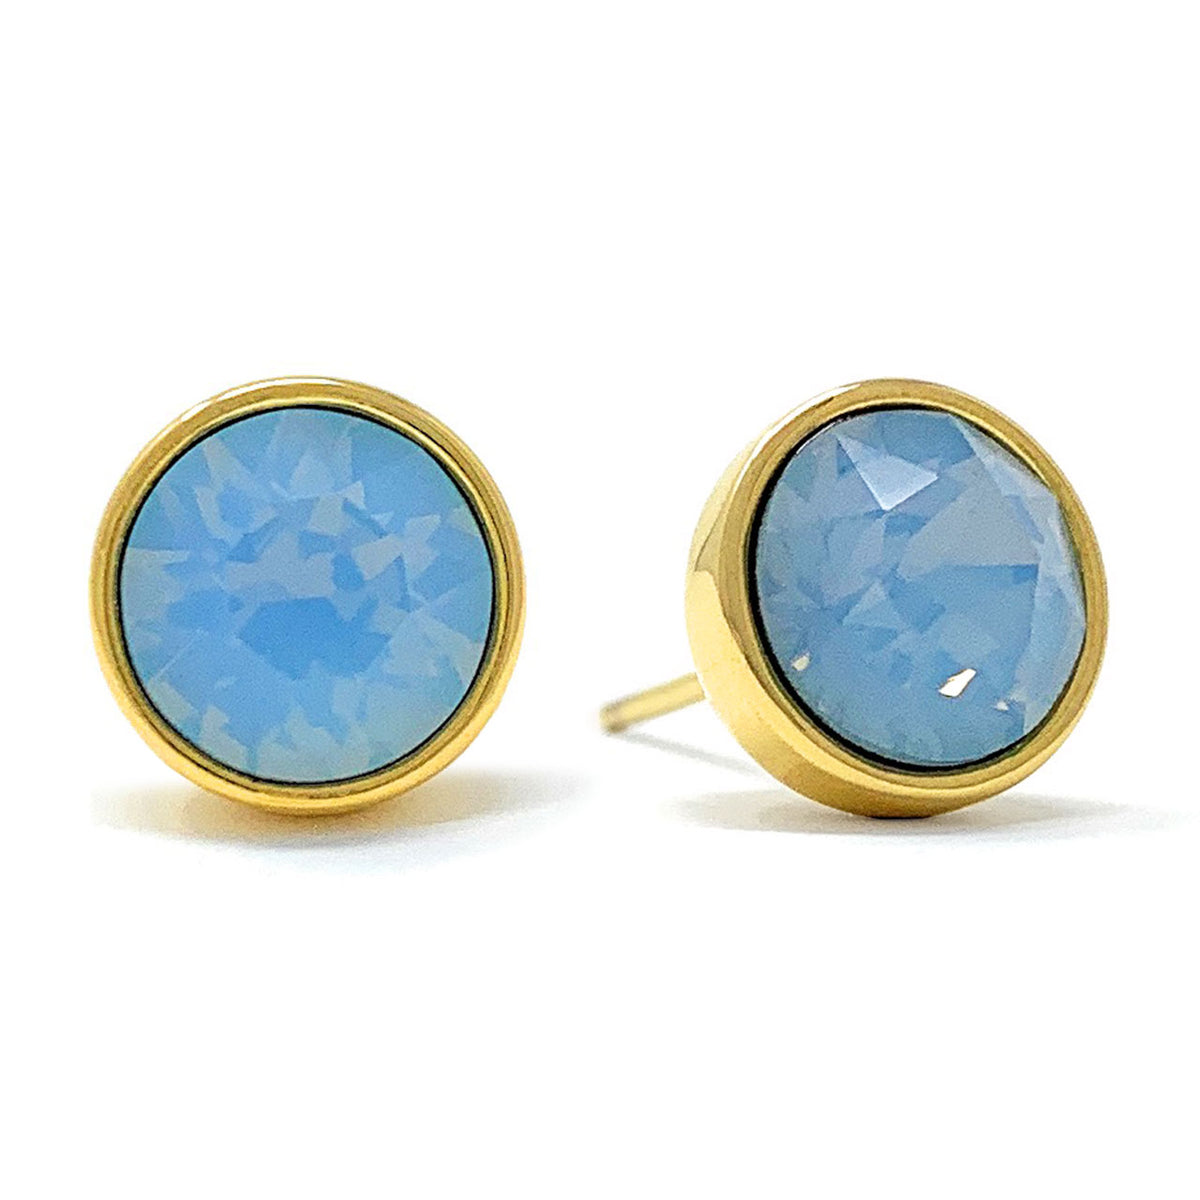 Harley Stud Earrings with Air Blue Round Opals from Swarovski Gold Plated - Ed Heart